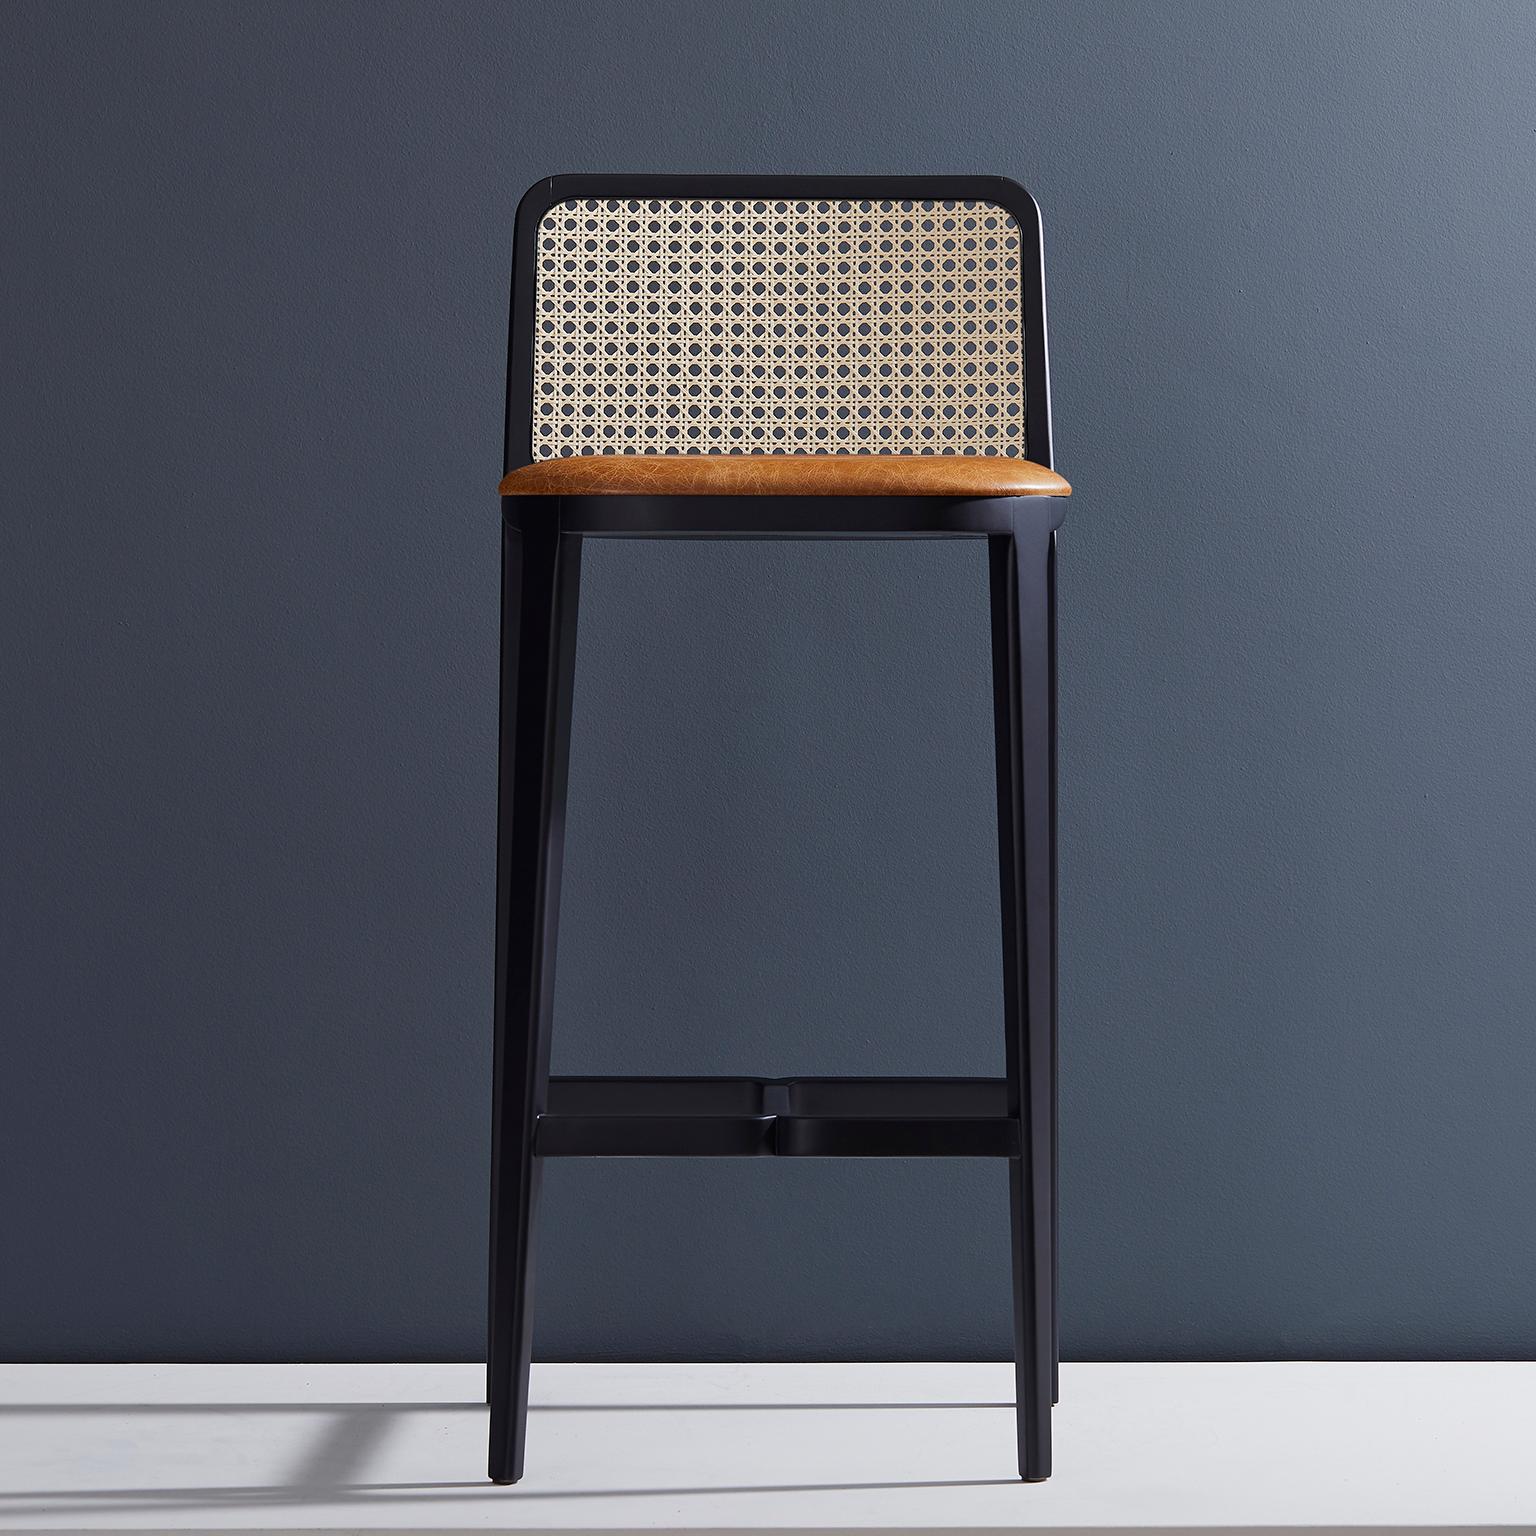 Brazilian Minimal Style, Solid Wood Stool, Textiles or Leather Seatings, Caning Backboard For Sale